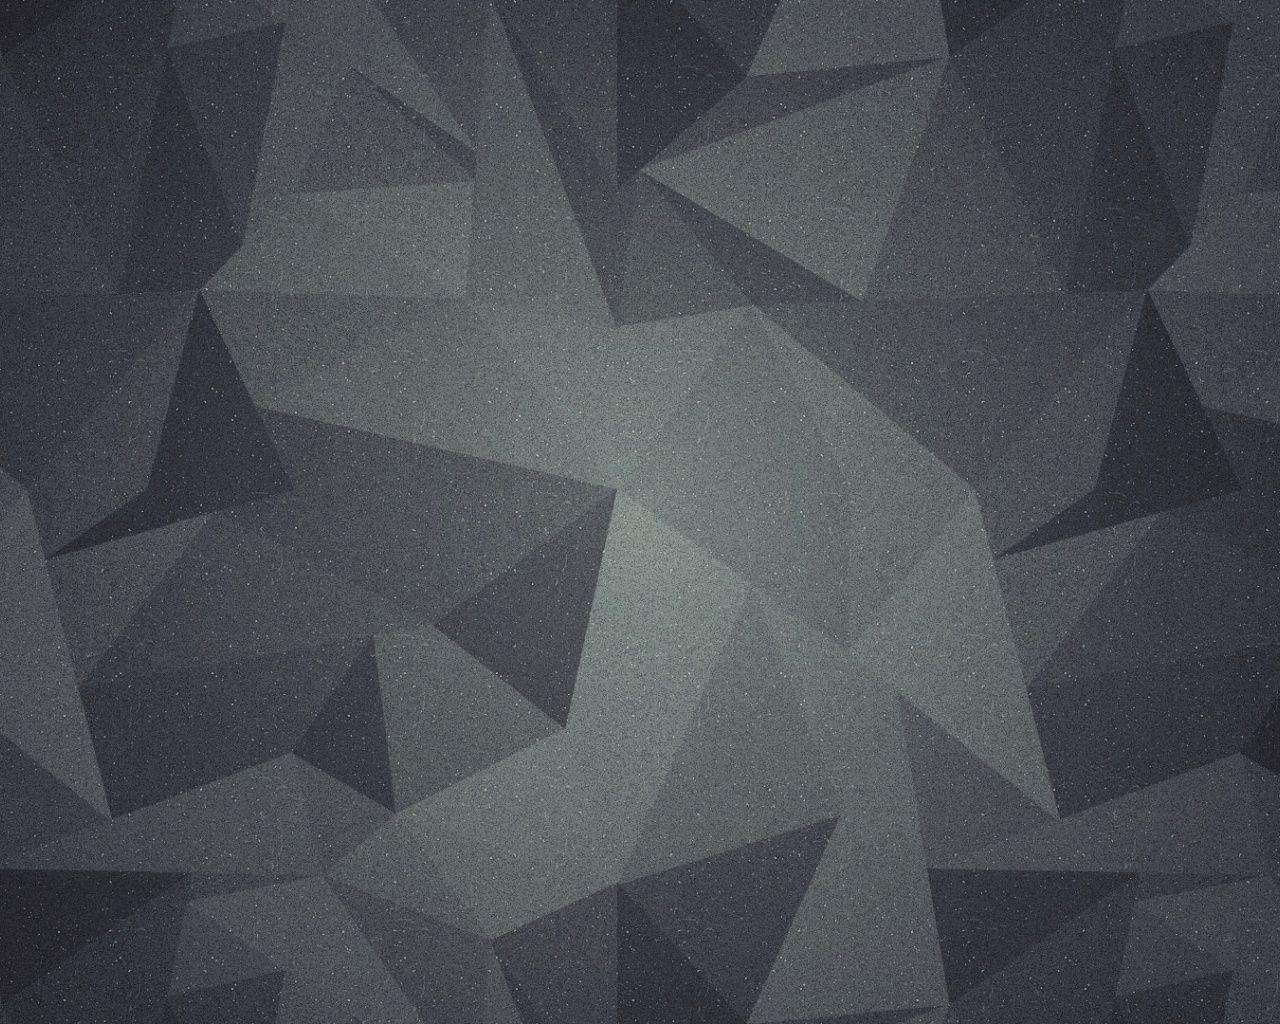 Abstract Geometric Shapes desktop PC and Mac wallpaper